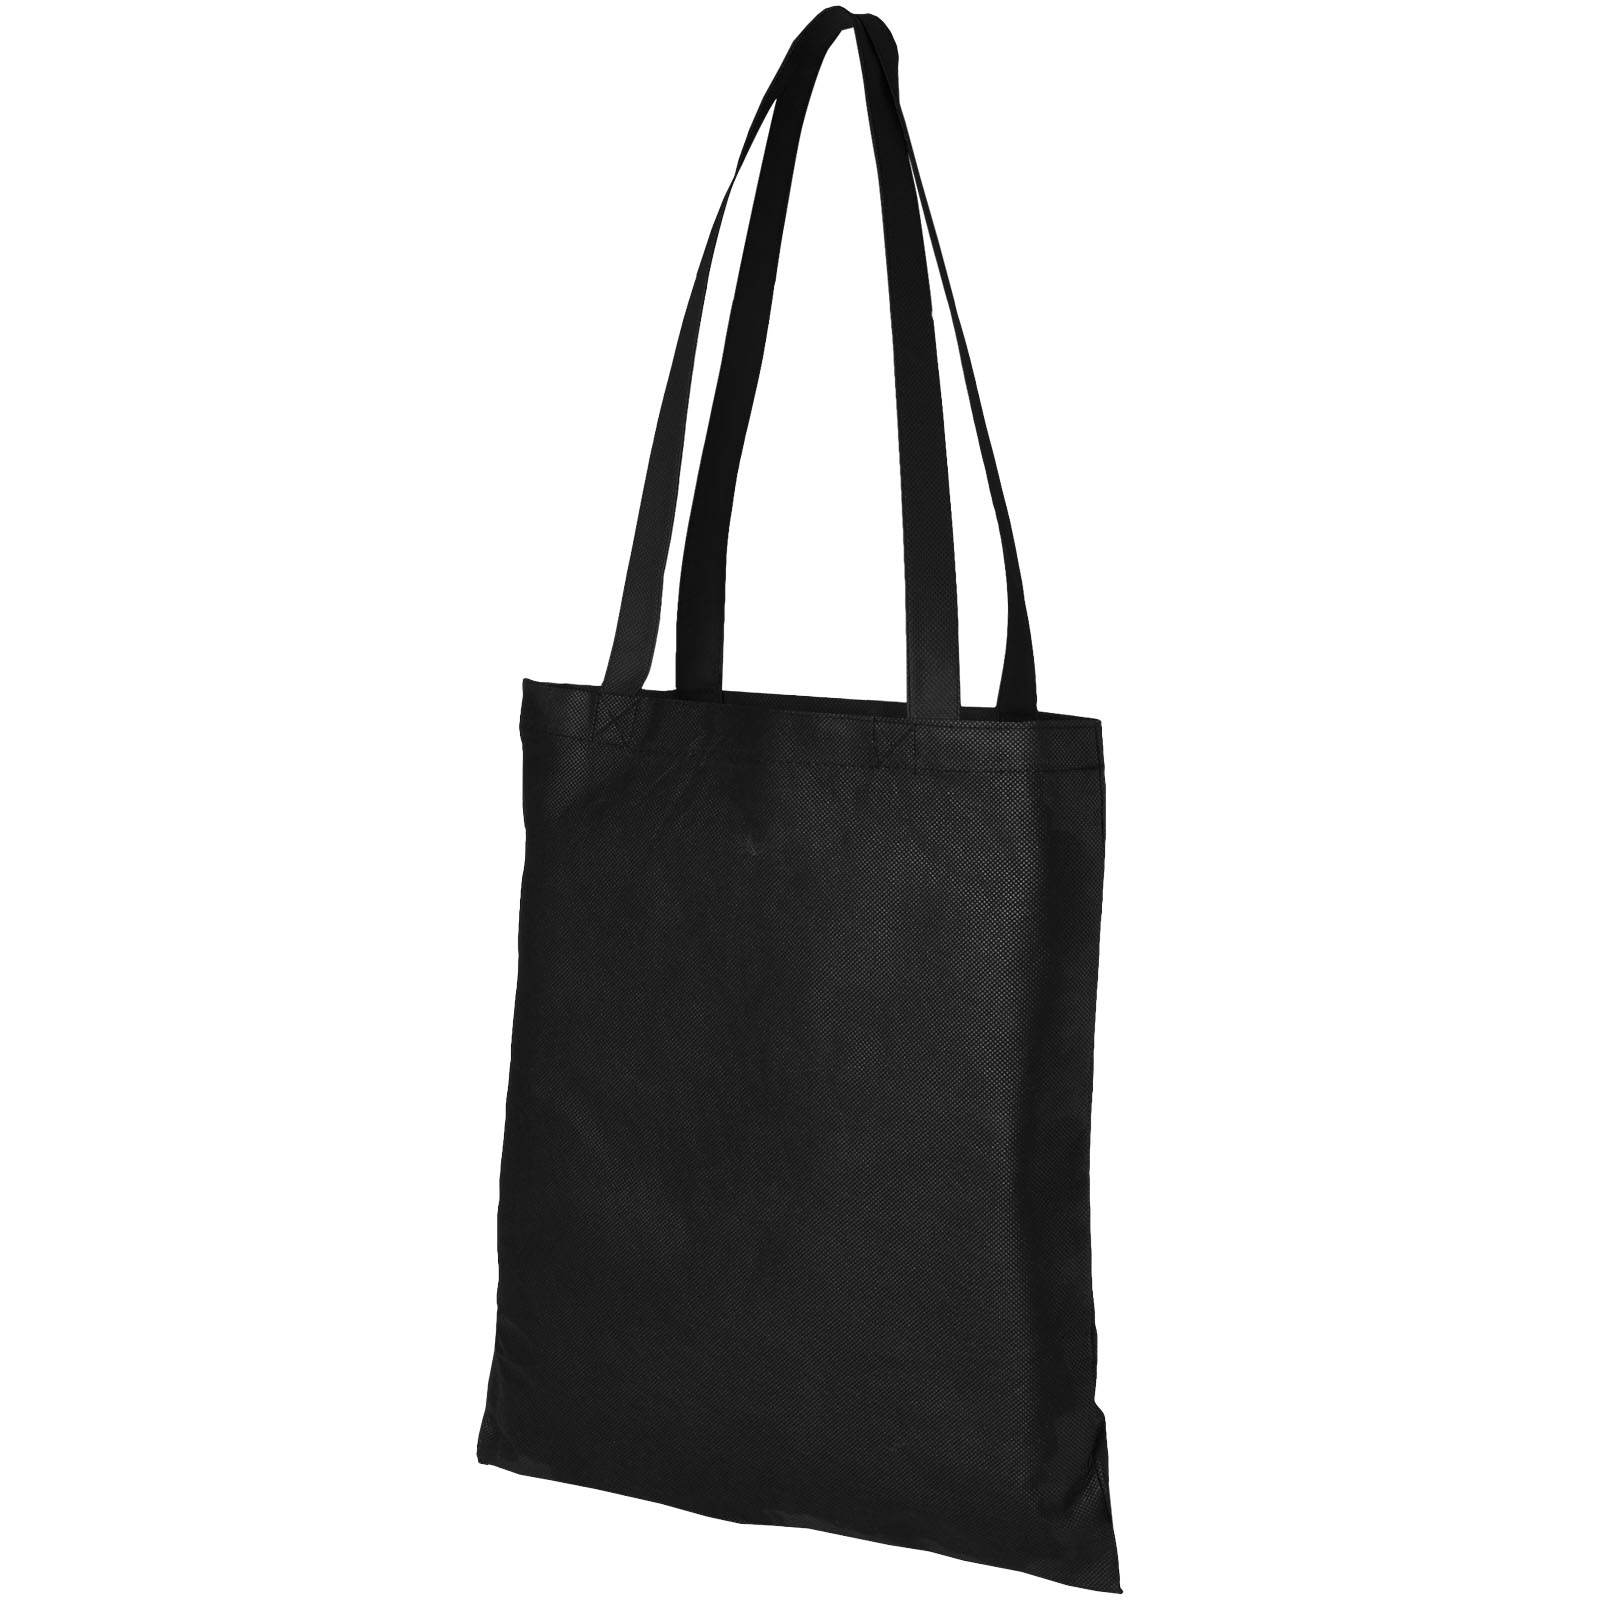 Advertising Conference bags - Zeus large non-woven convention tote bag 6L - 0